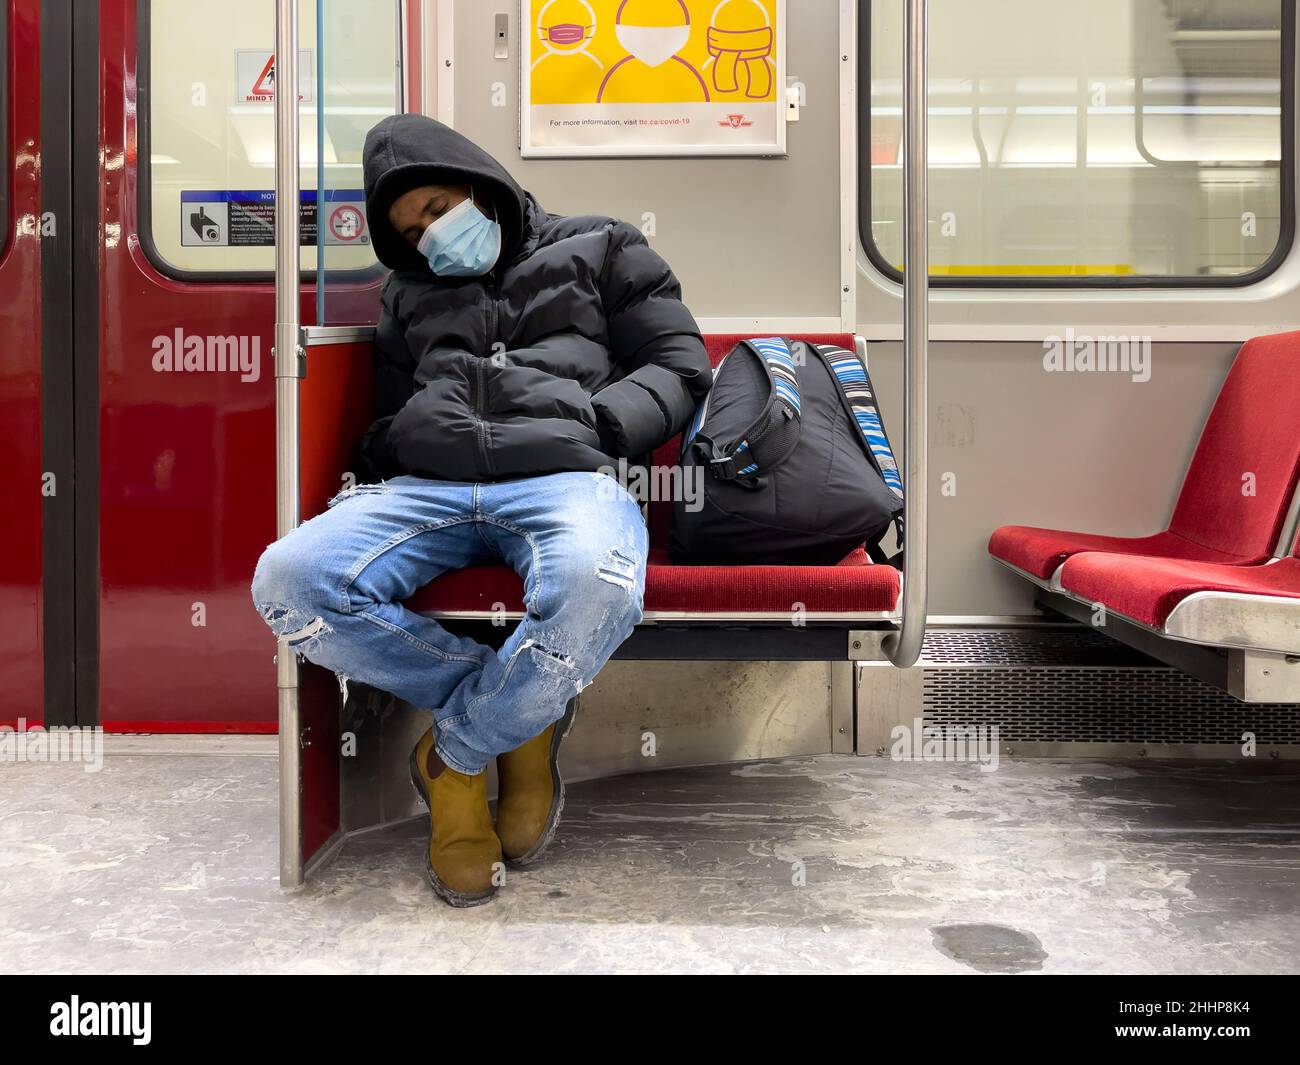 Toronto, Canada-January 22, 2022: A man sleeping in a subway train with protective face mask Stock Photo